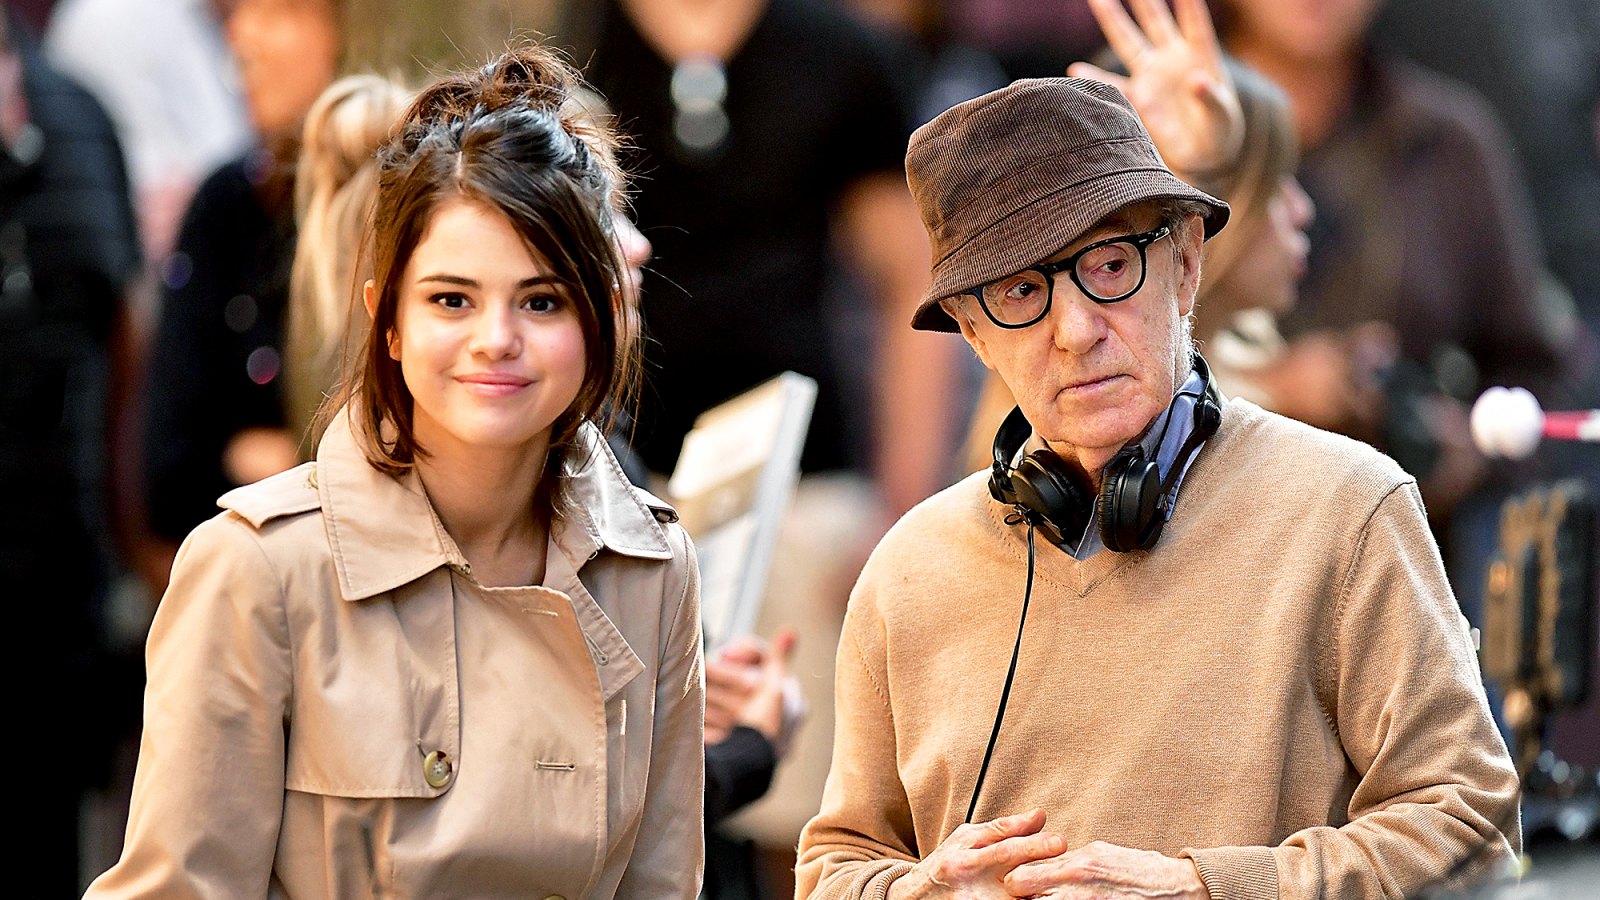 Selena Gomez and Woody Allen seen on location for Woody Allen's A Rainy Day in New York on September 11, 2017 in New York City.